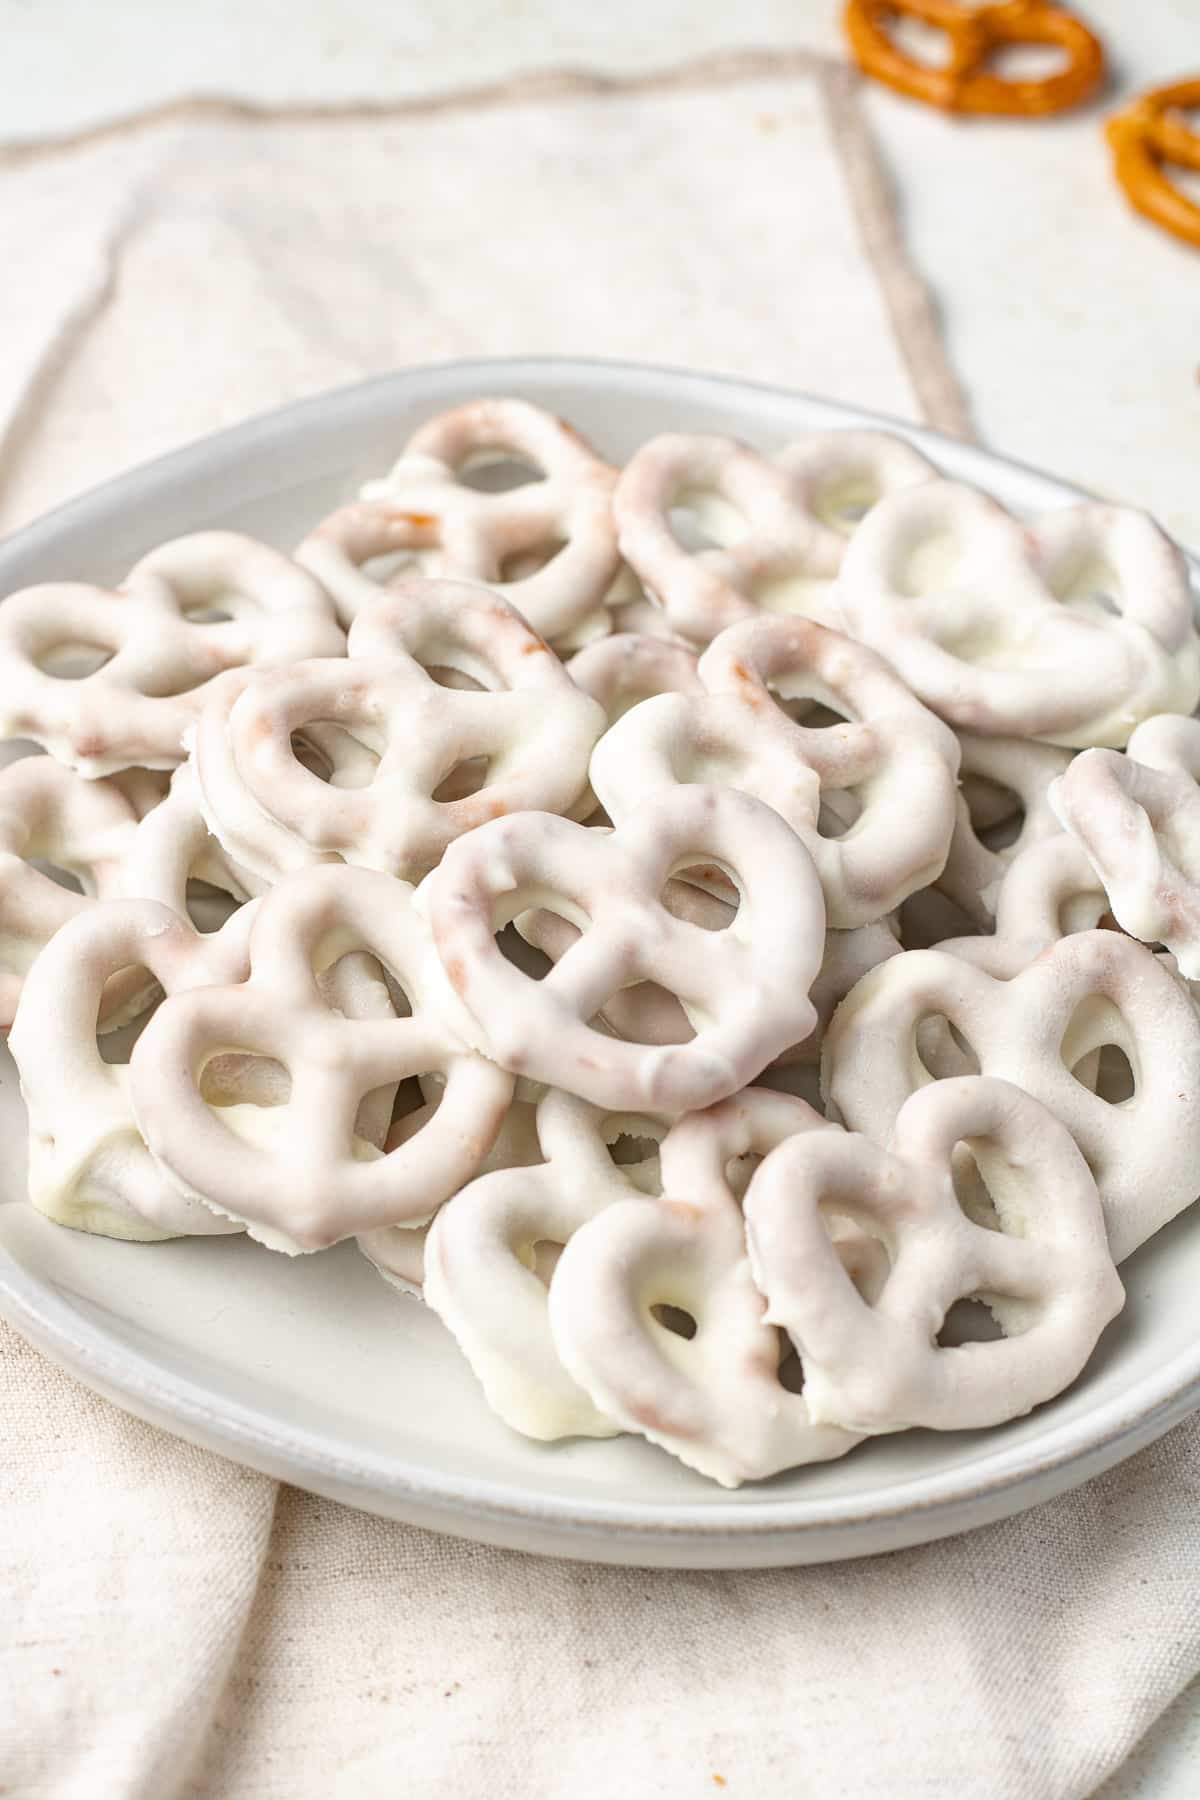 Side view of white chocolate pretzels on a plate.